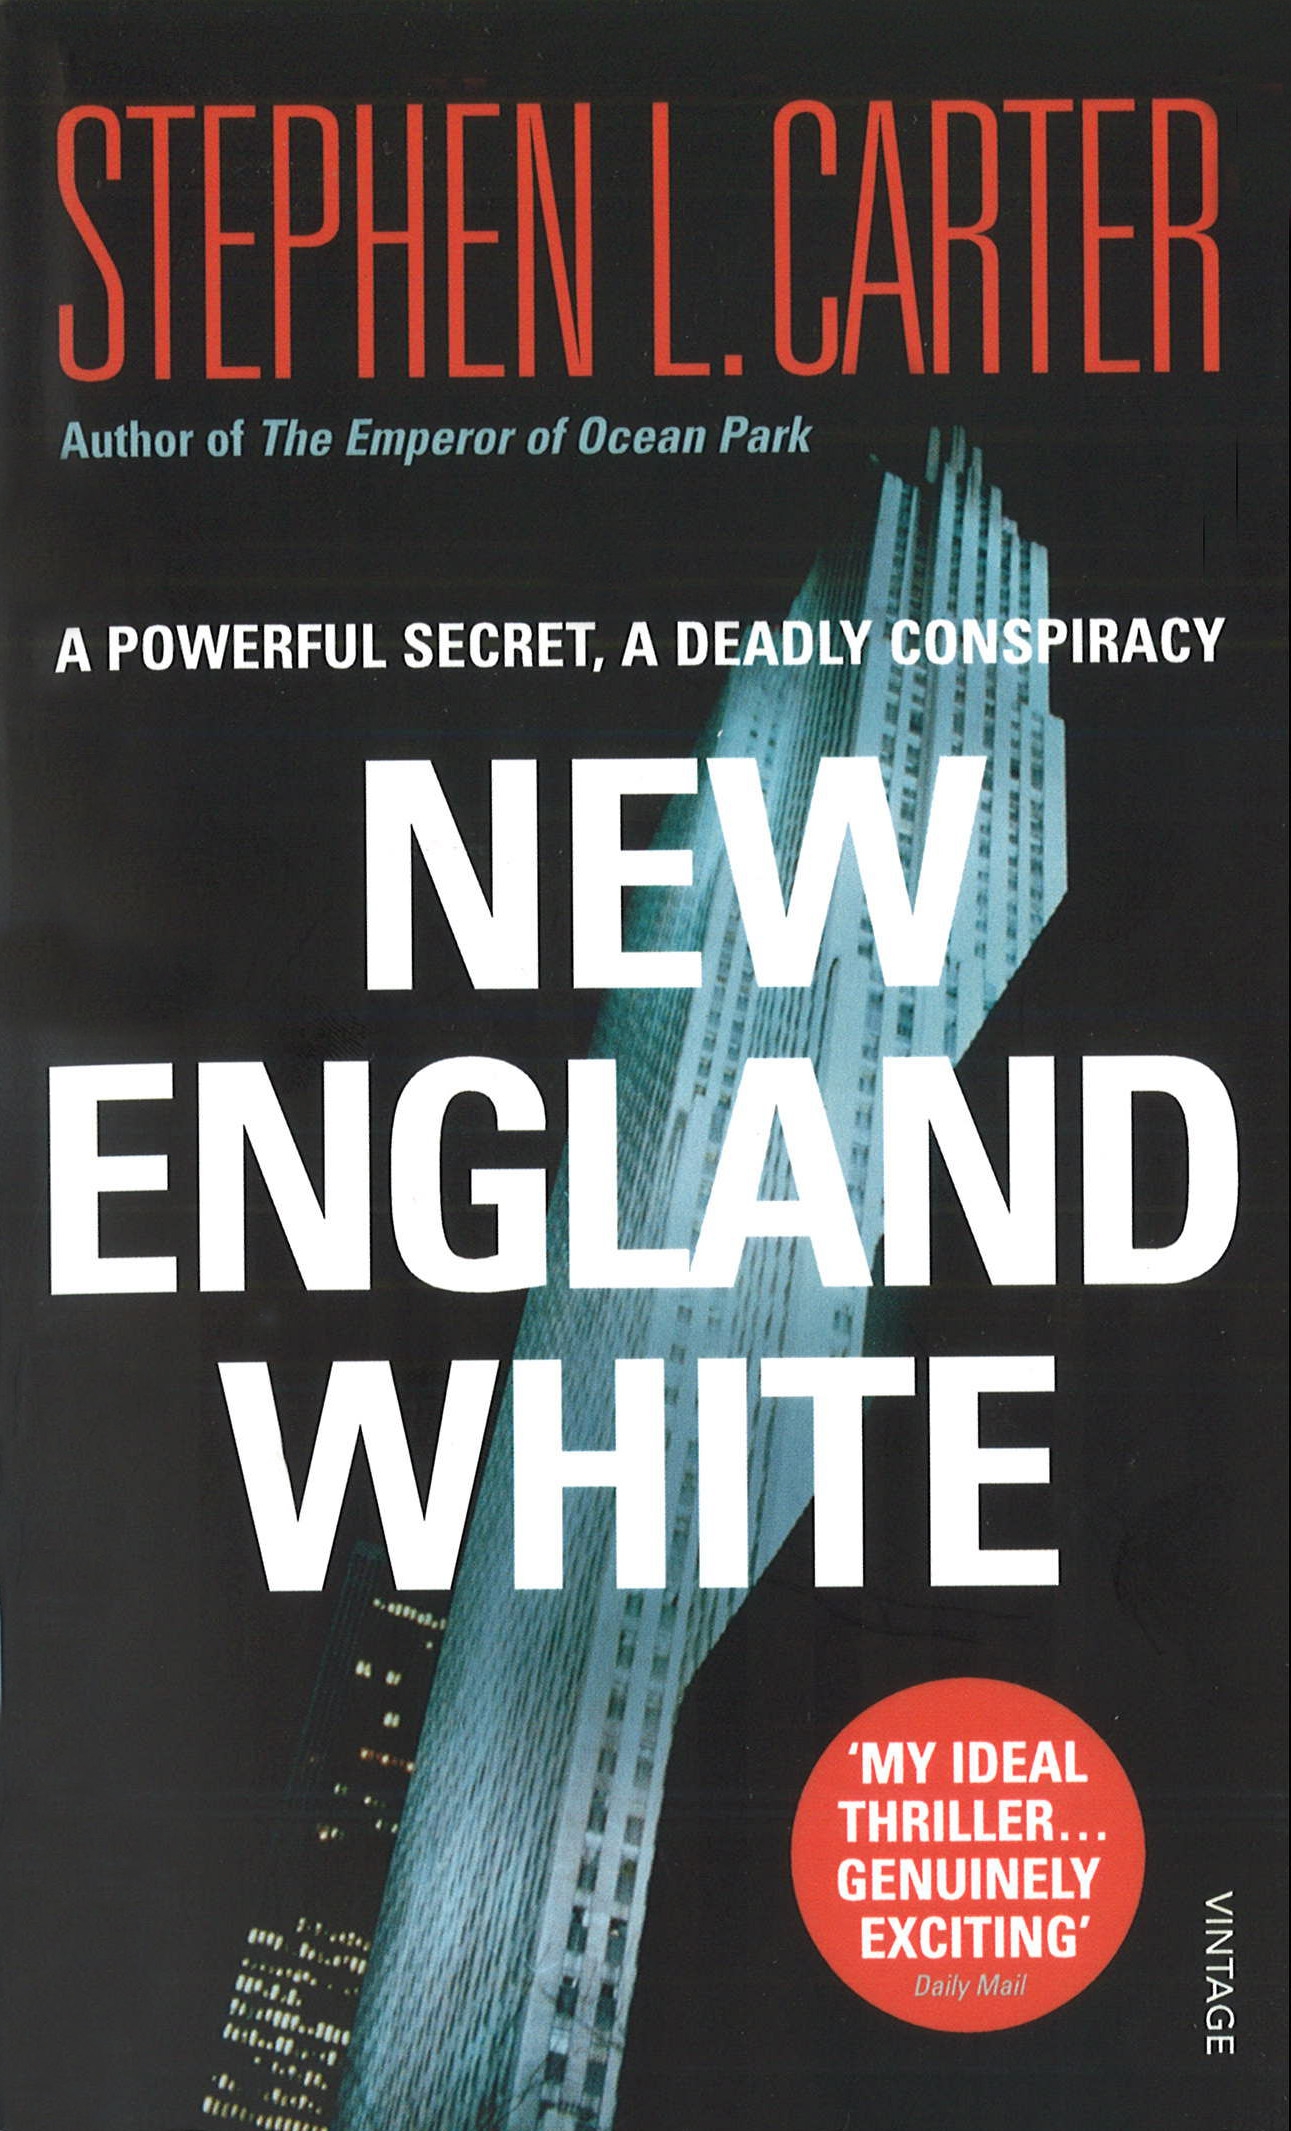 New England White by Stephen L. Carter